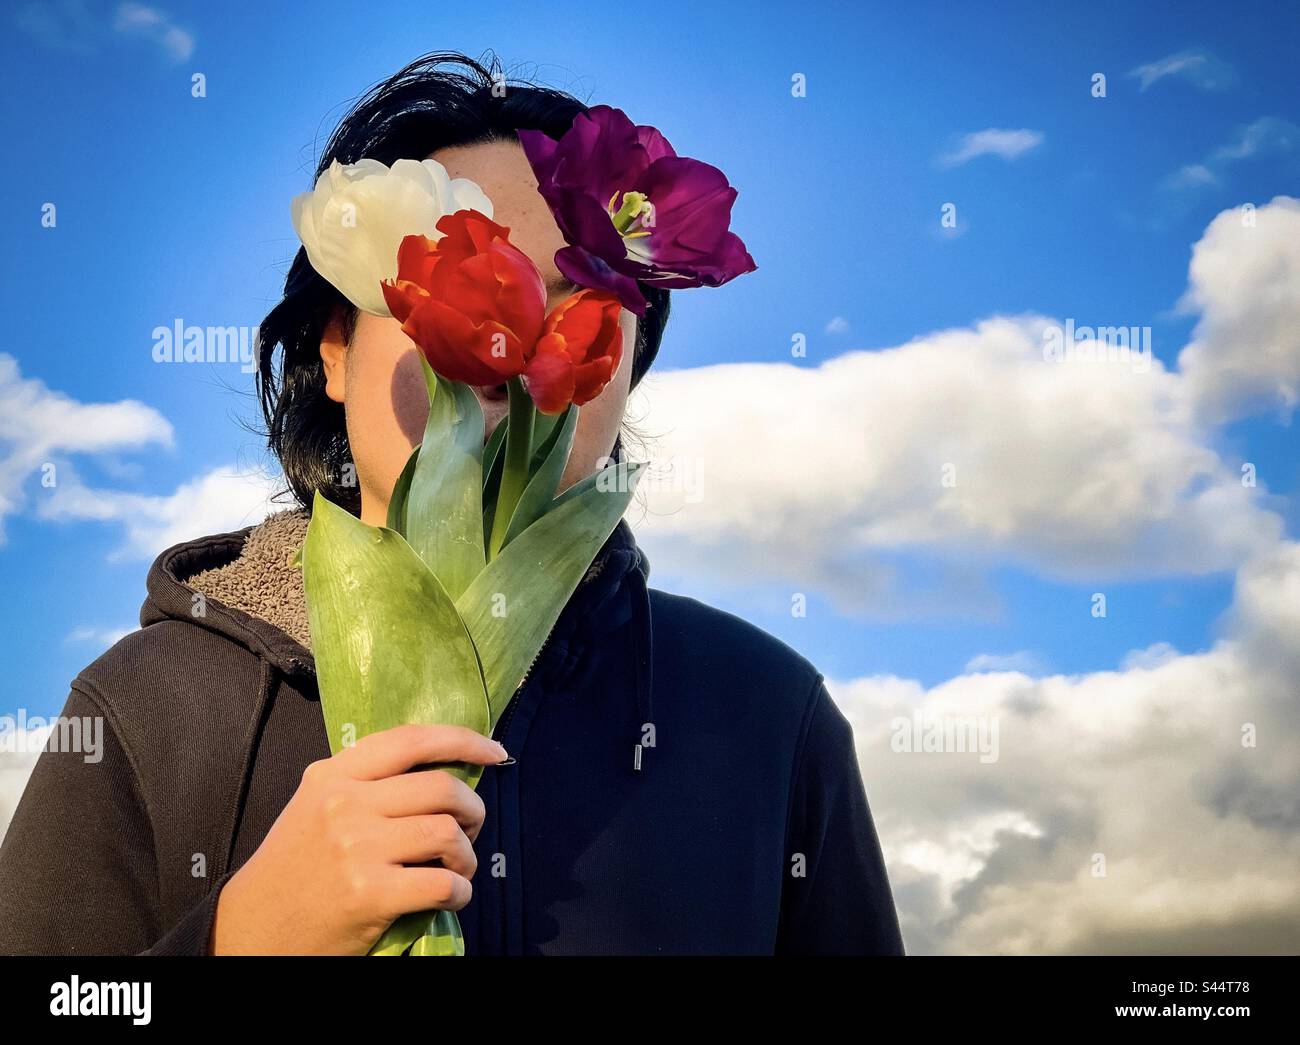 In the clouds. Portrait of young man holding bouquet of mixed color tulip flowers against blue sky with fluffy white clouds. Obscured face. Spring theme. Stock Photo